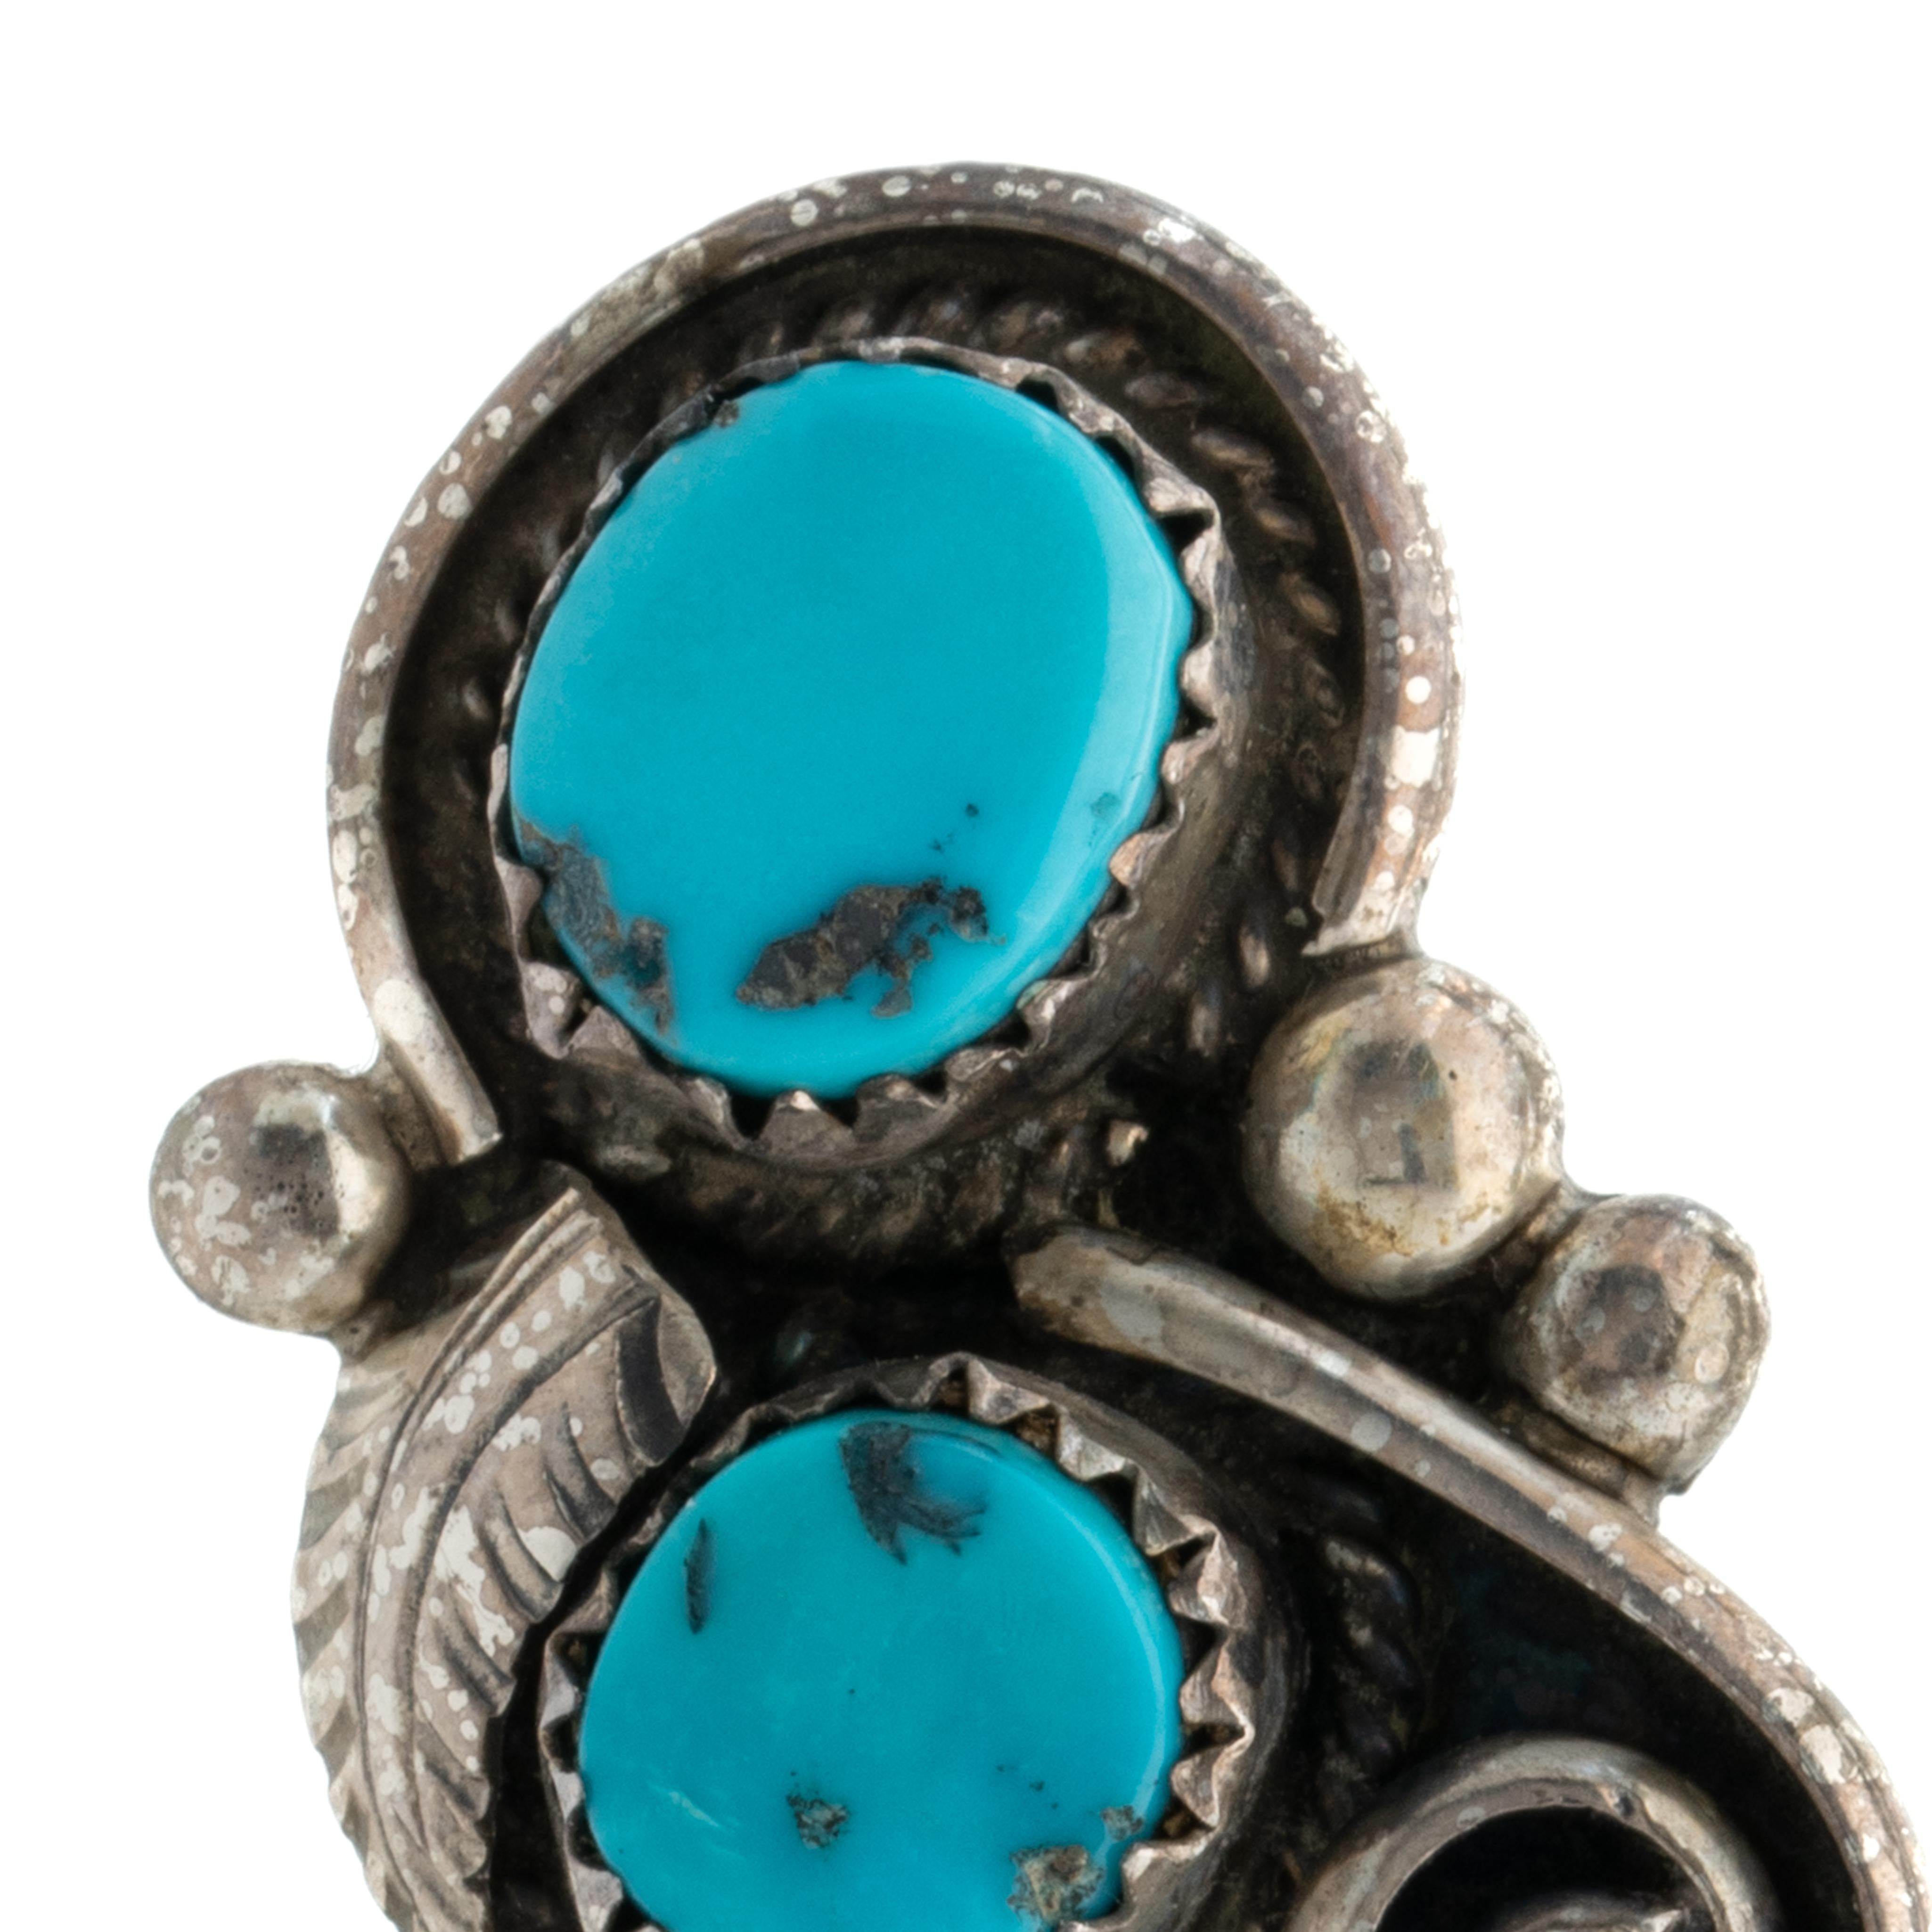 Vintage Native American Navajo Silver and Turquoise Double Drop Earrings c.1970s

Length: 0.88